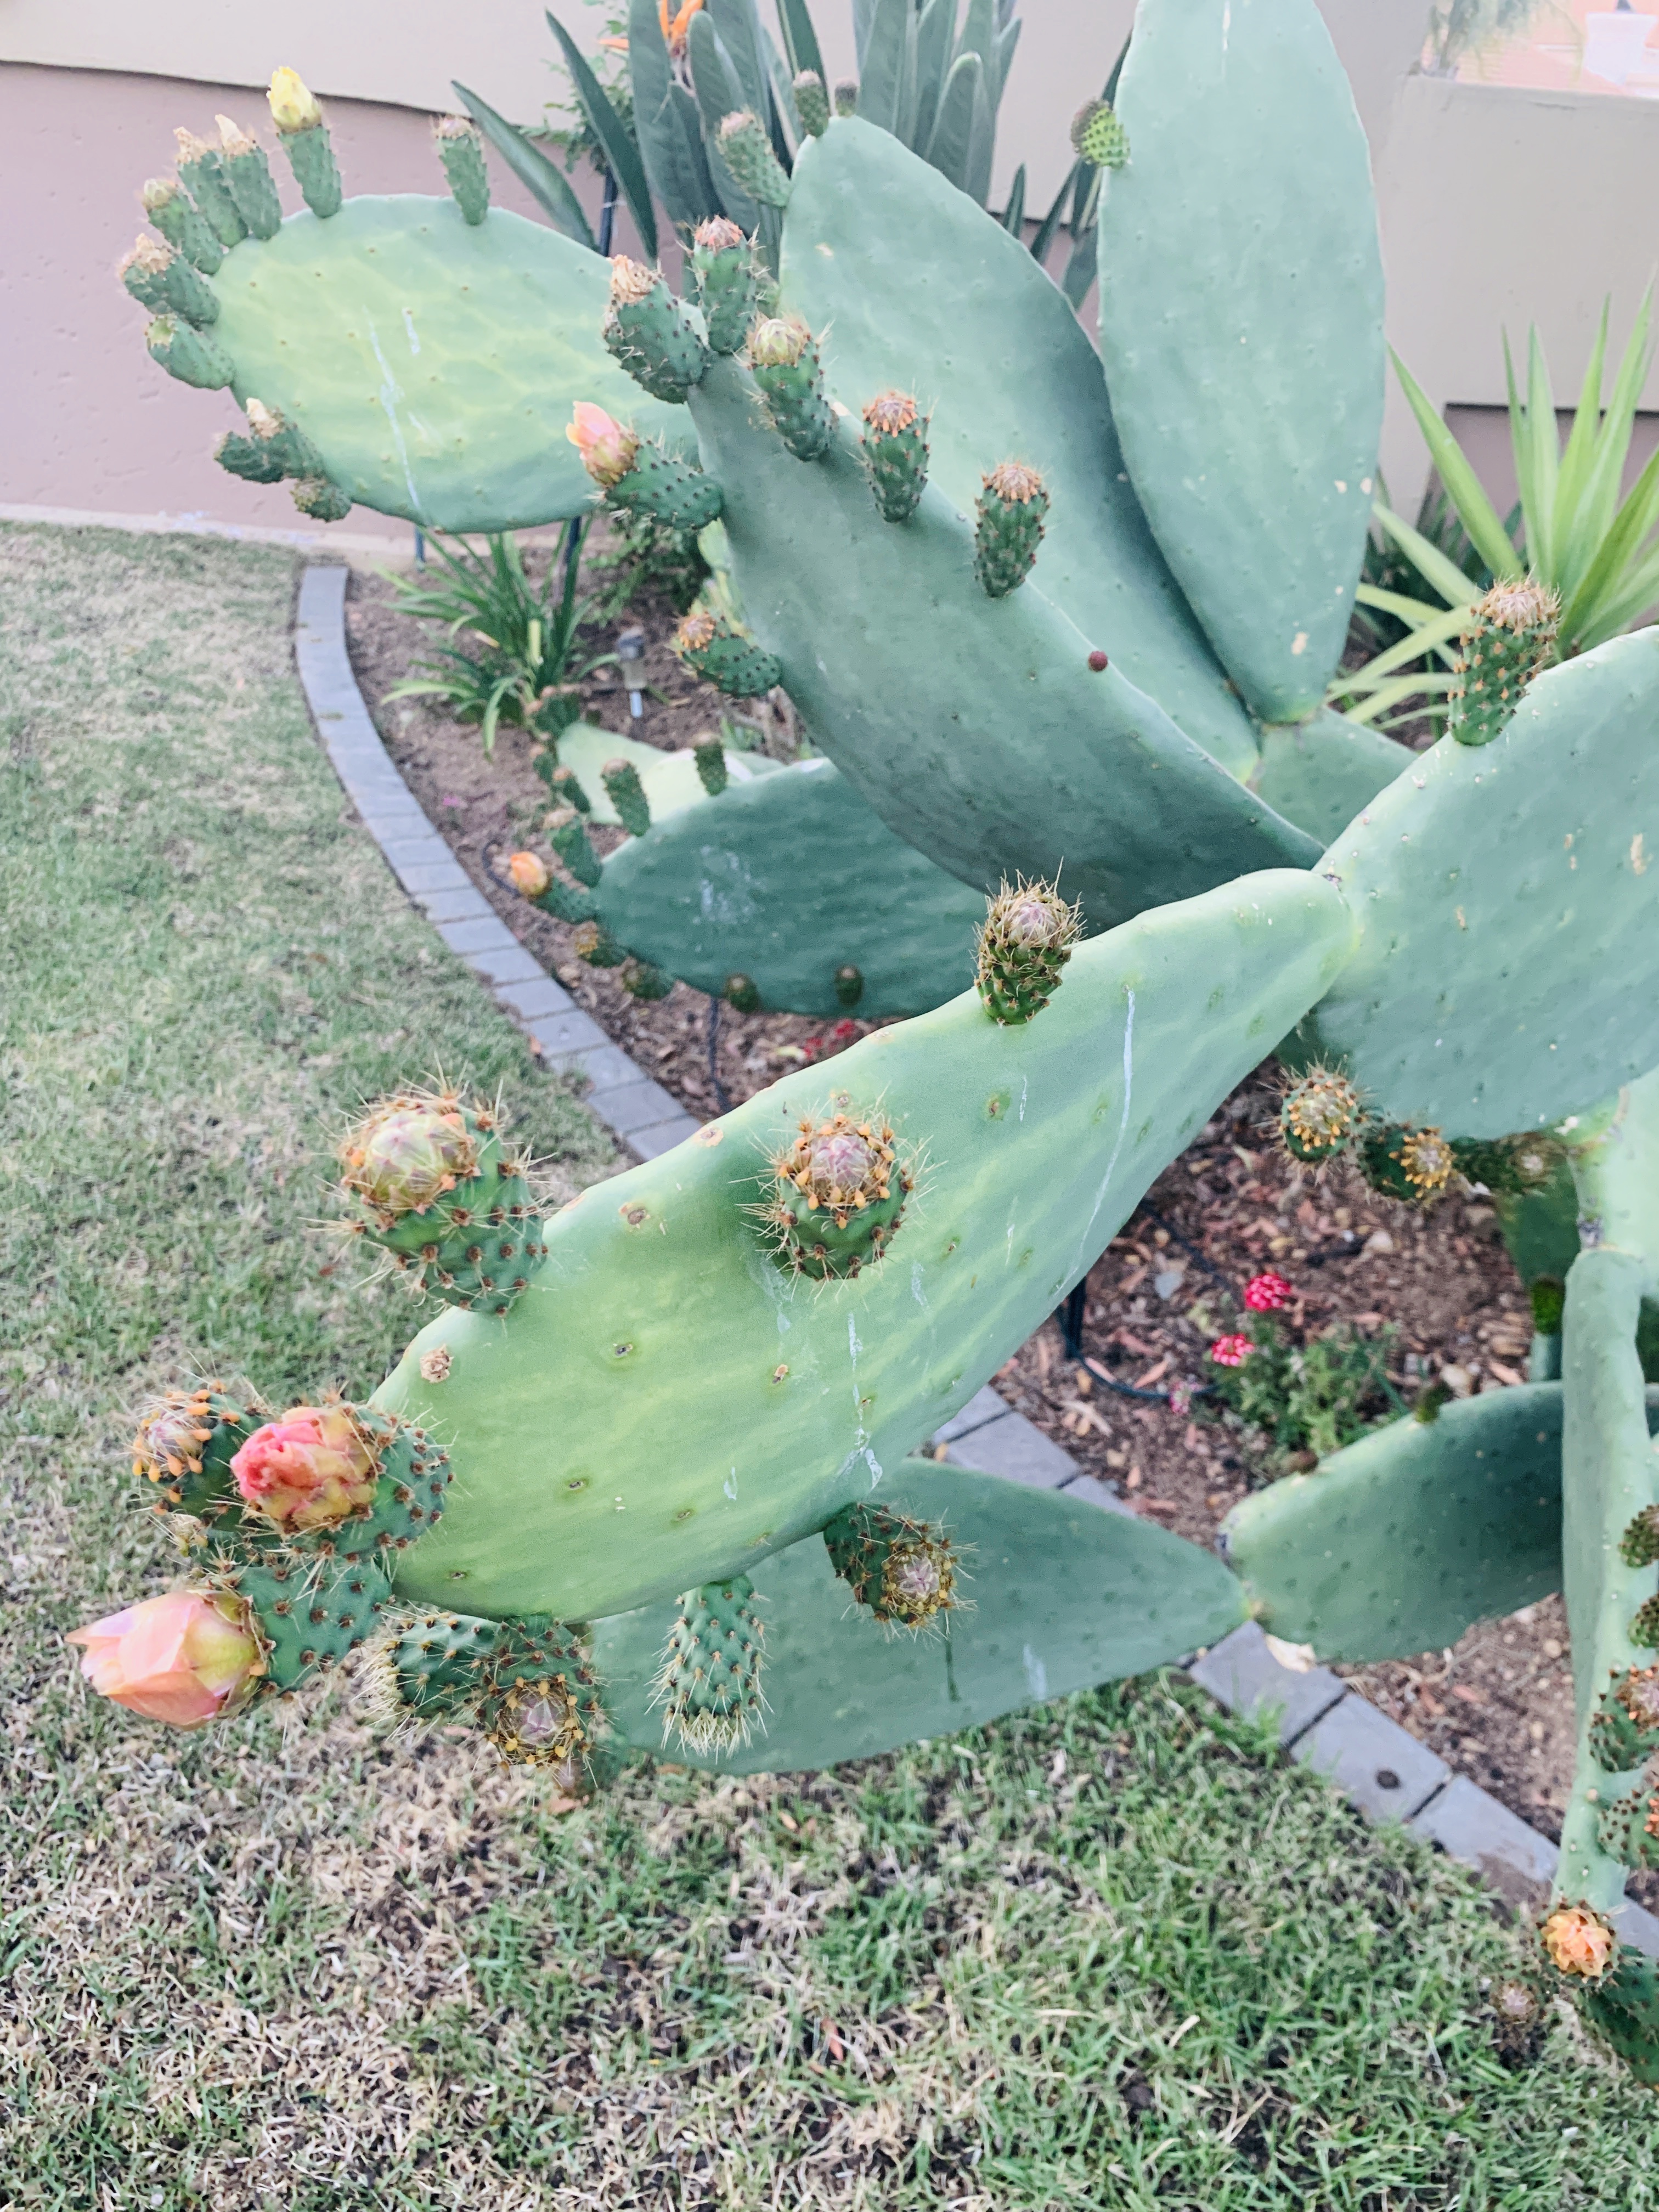 My First Prickly Pear Harvest in South Africa